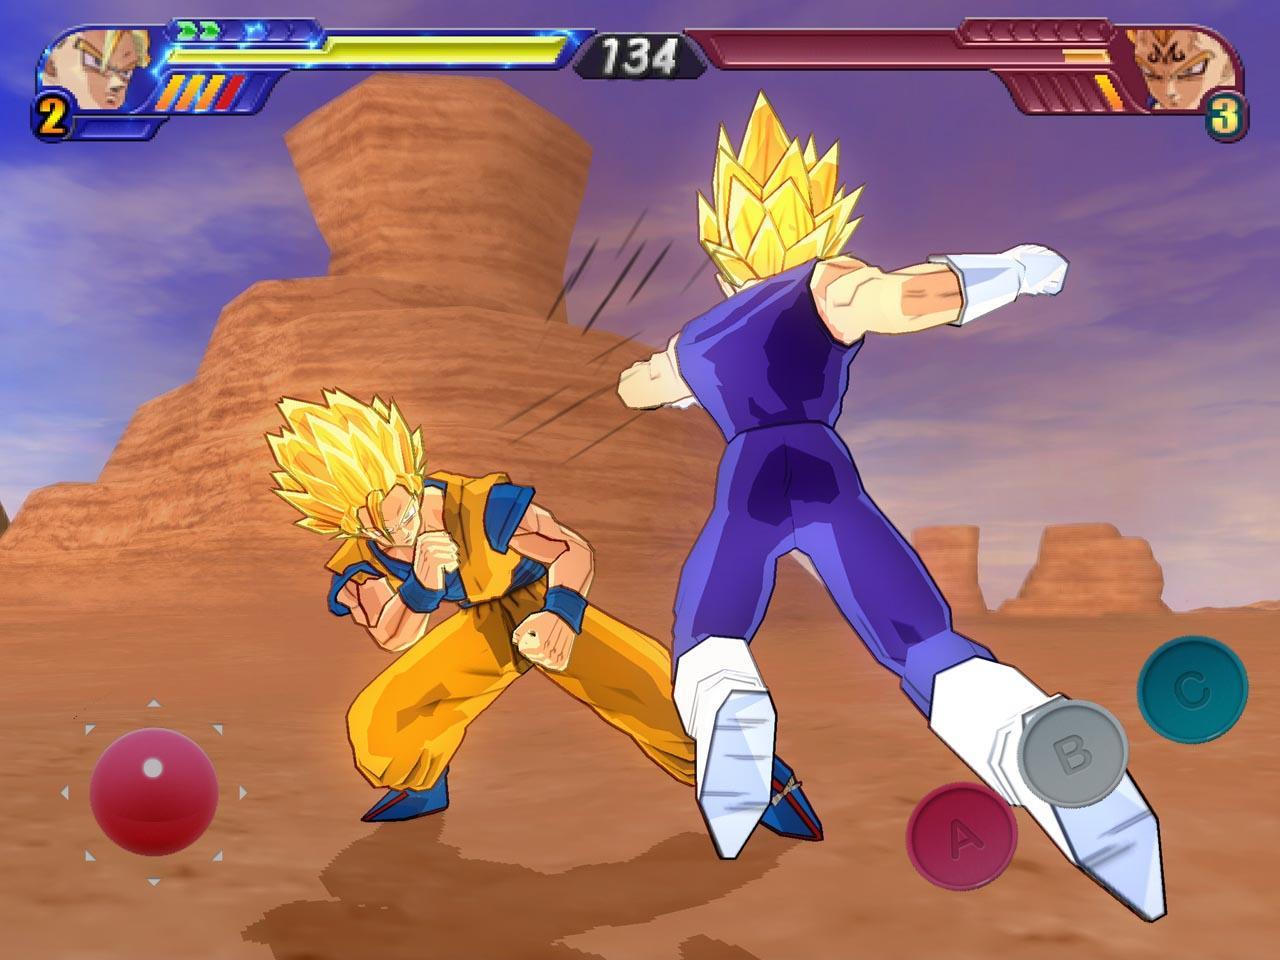 Guide Dragon Ball Z Budokai Tenkaichi 3 of PPSSPP APK for Android Download